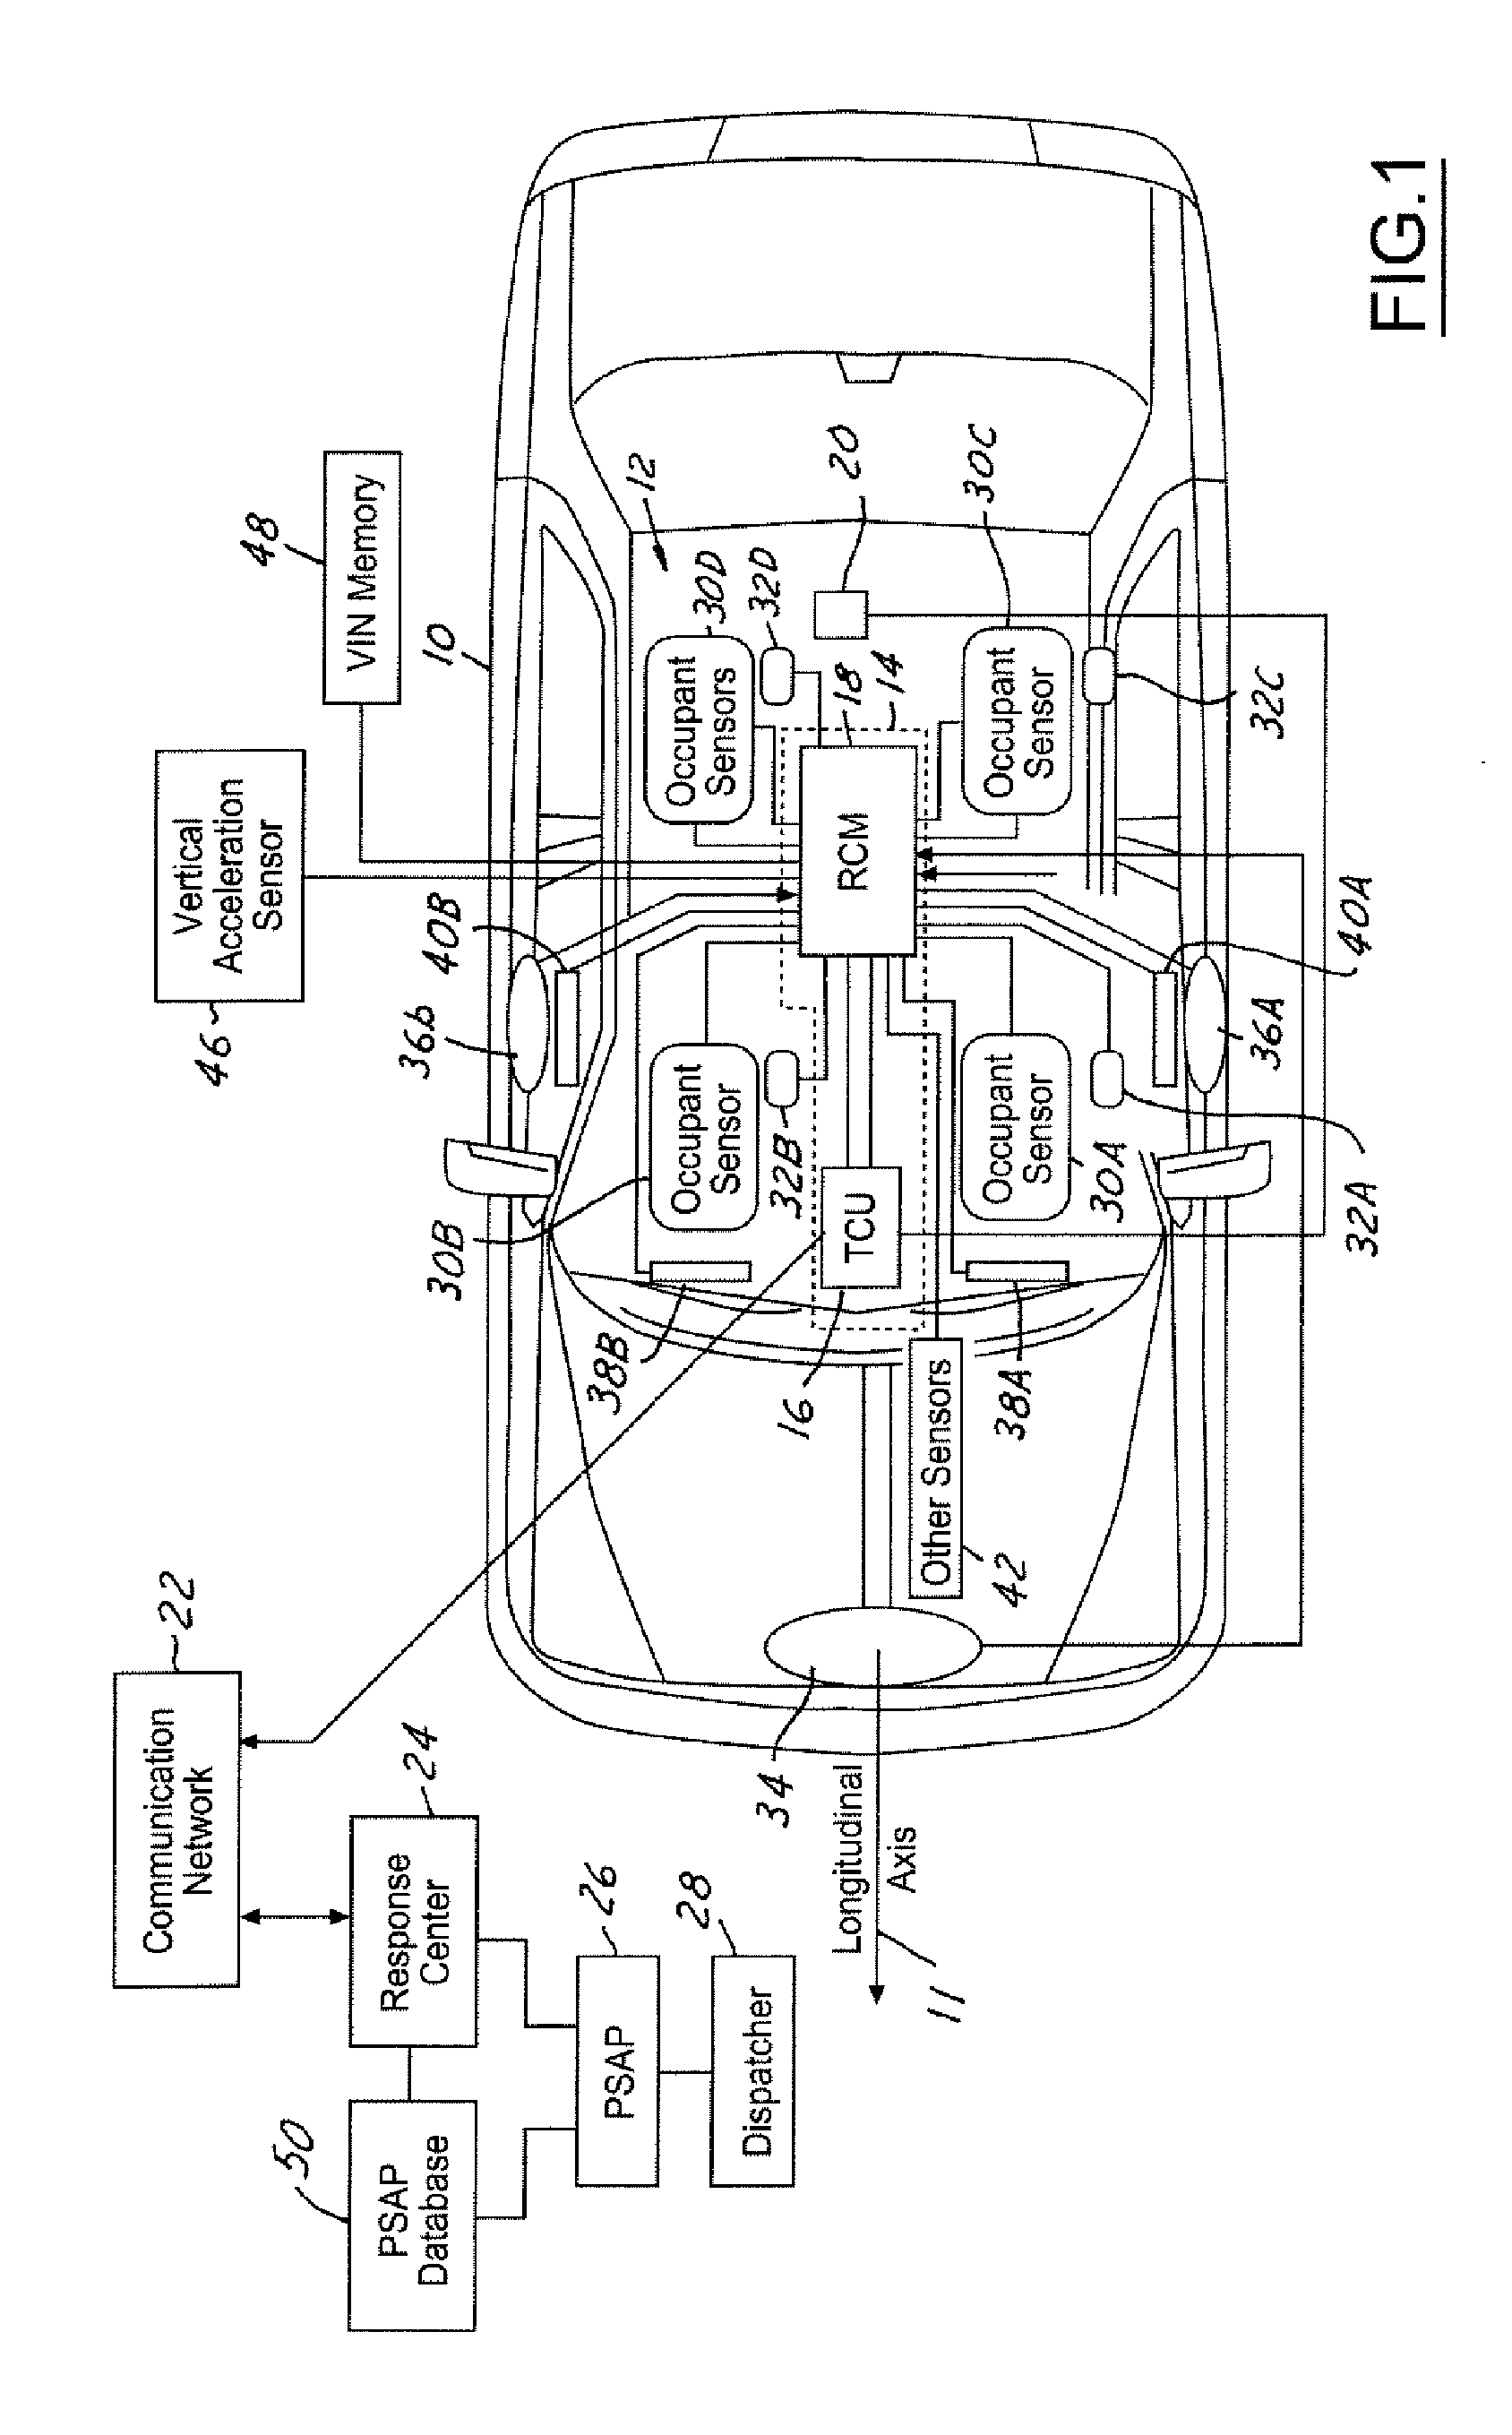 Crash notification system for an automotive vehicle